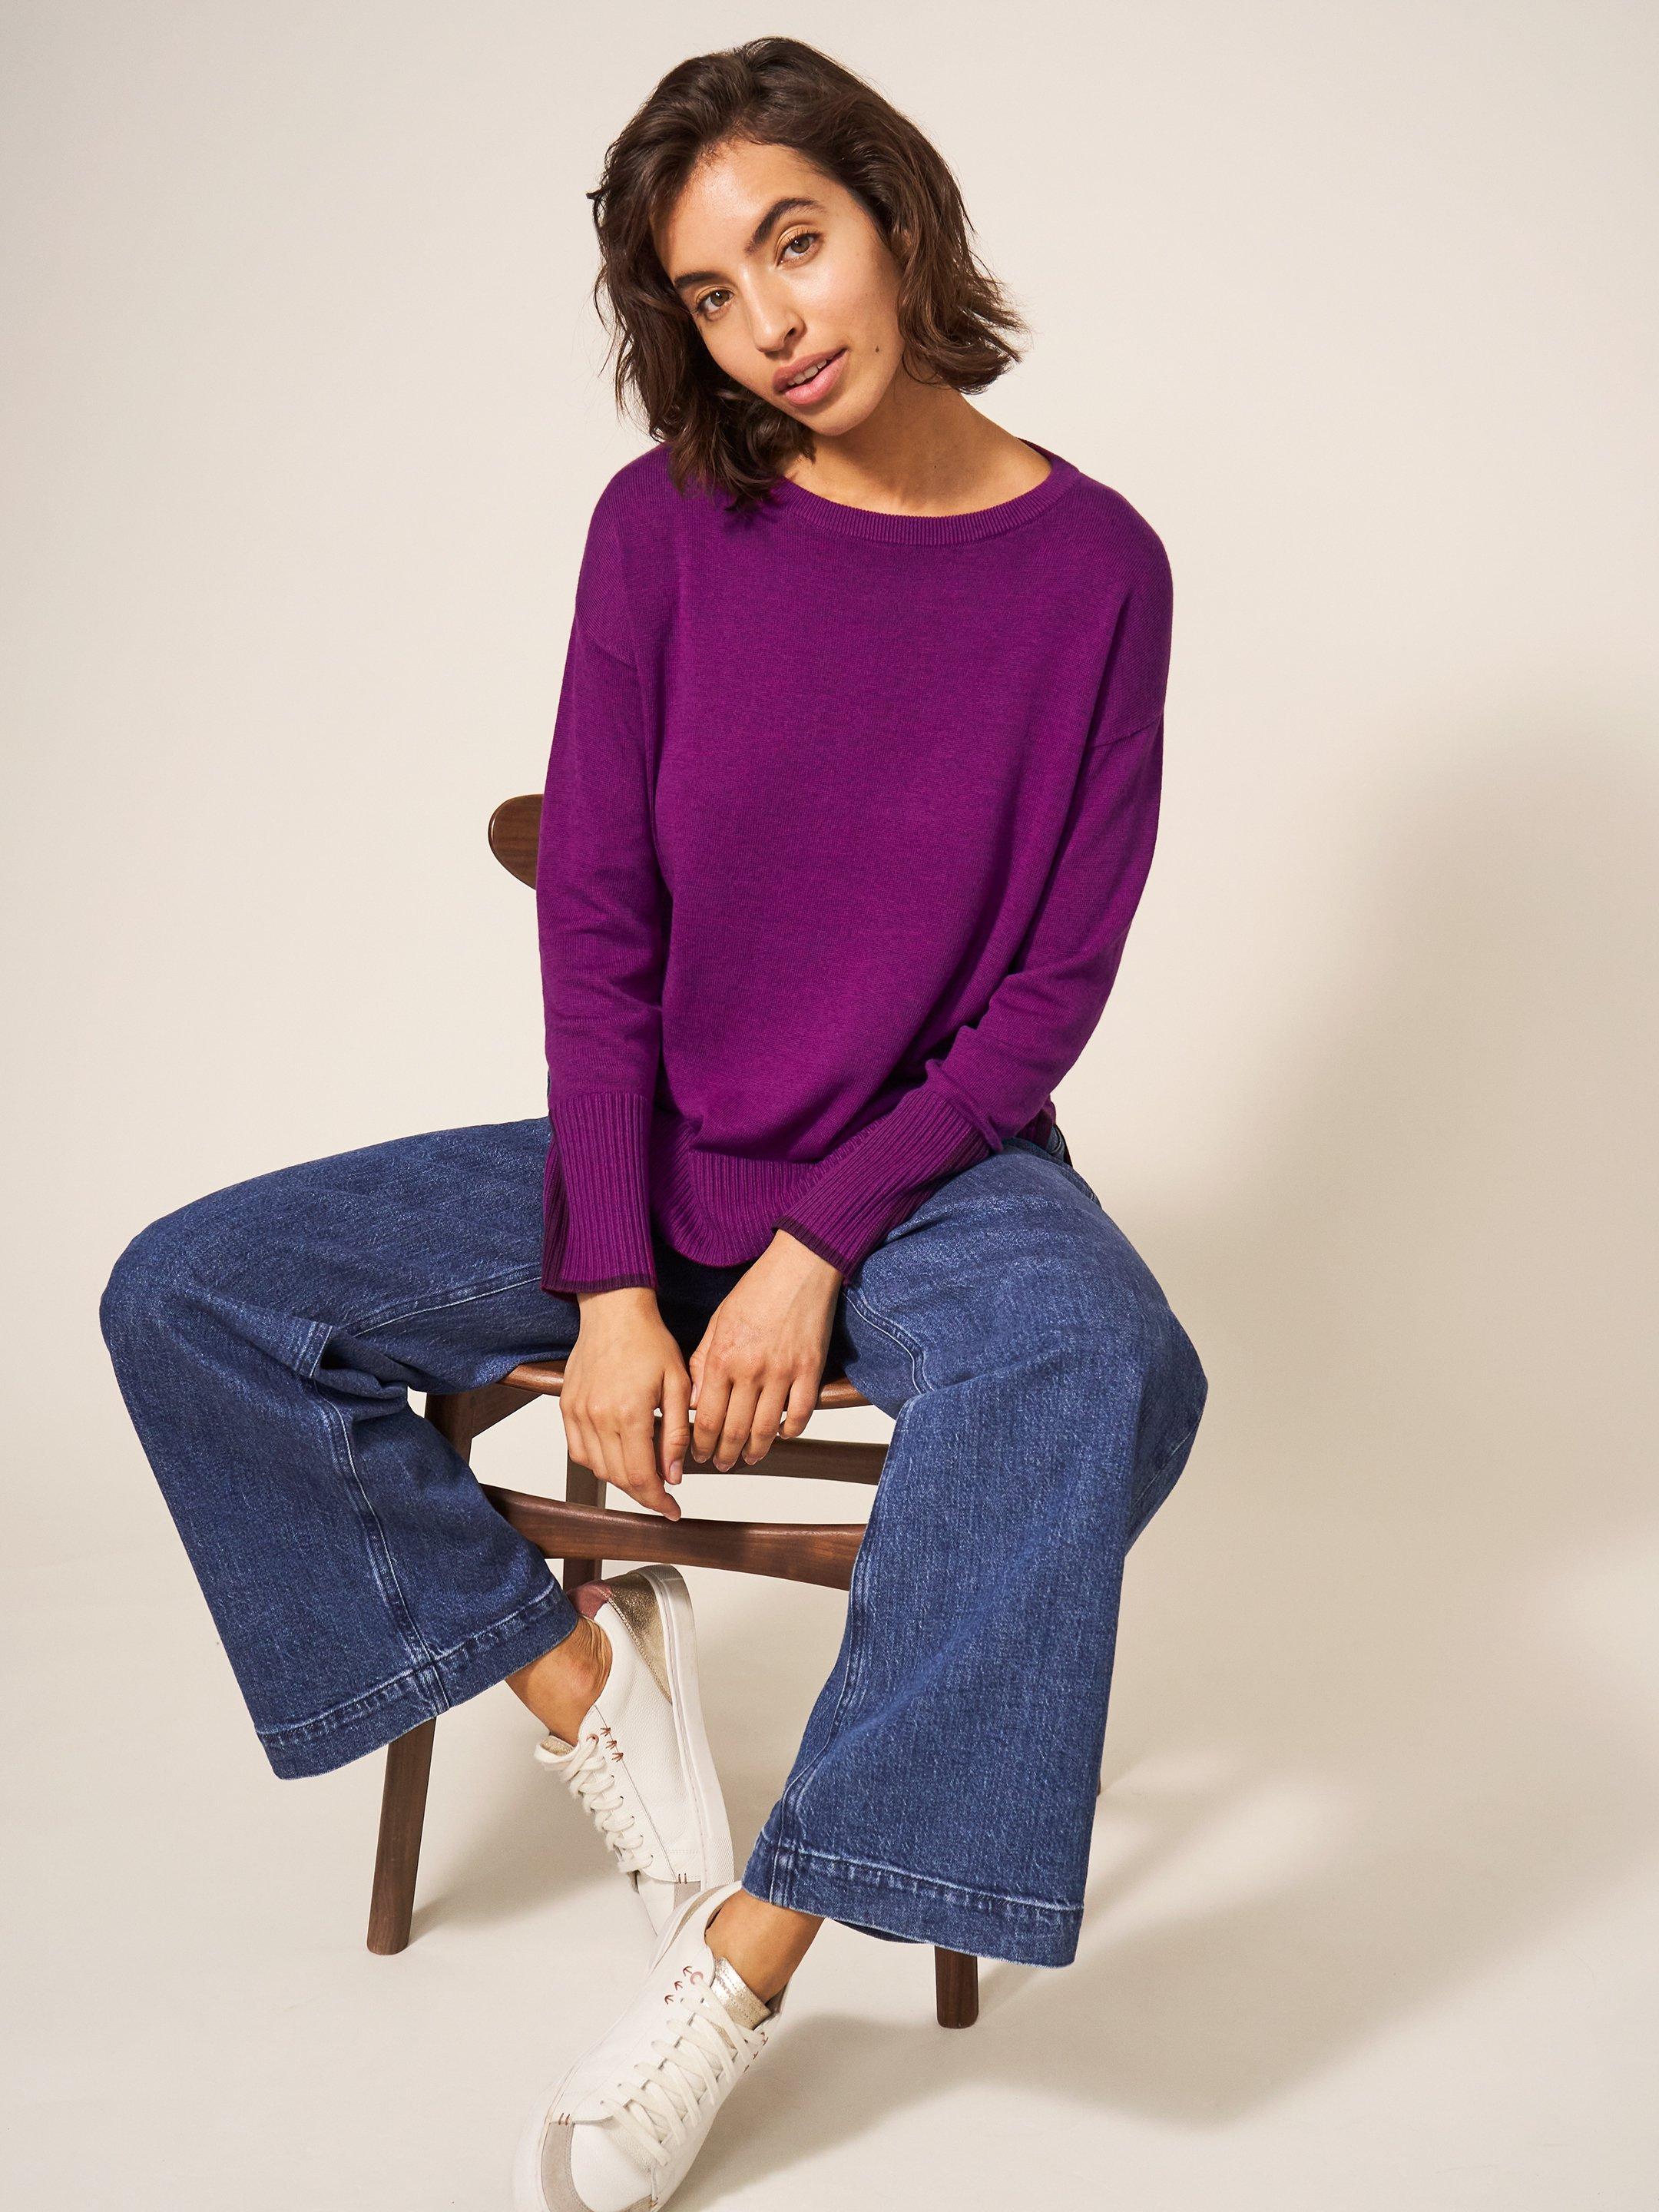 Olive Knitted Jumper in DK PINK - LIFESTYLE